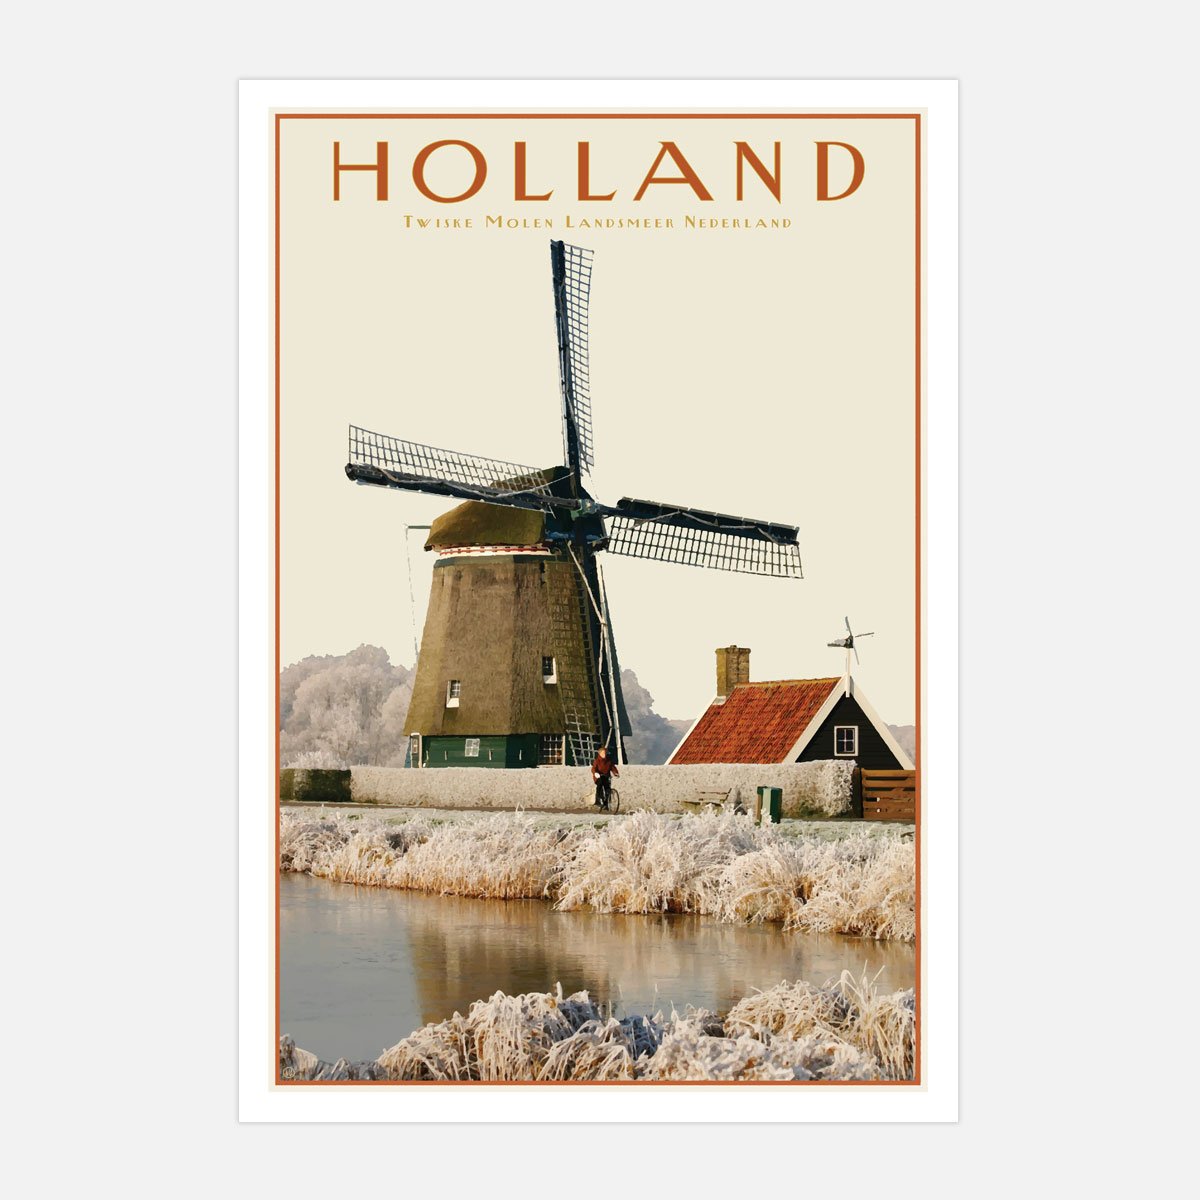 North Holland Windmill print. Vintage travel style. Original design by places we luv